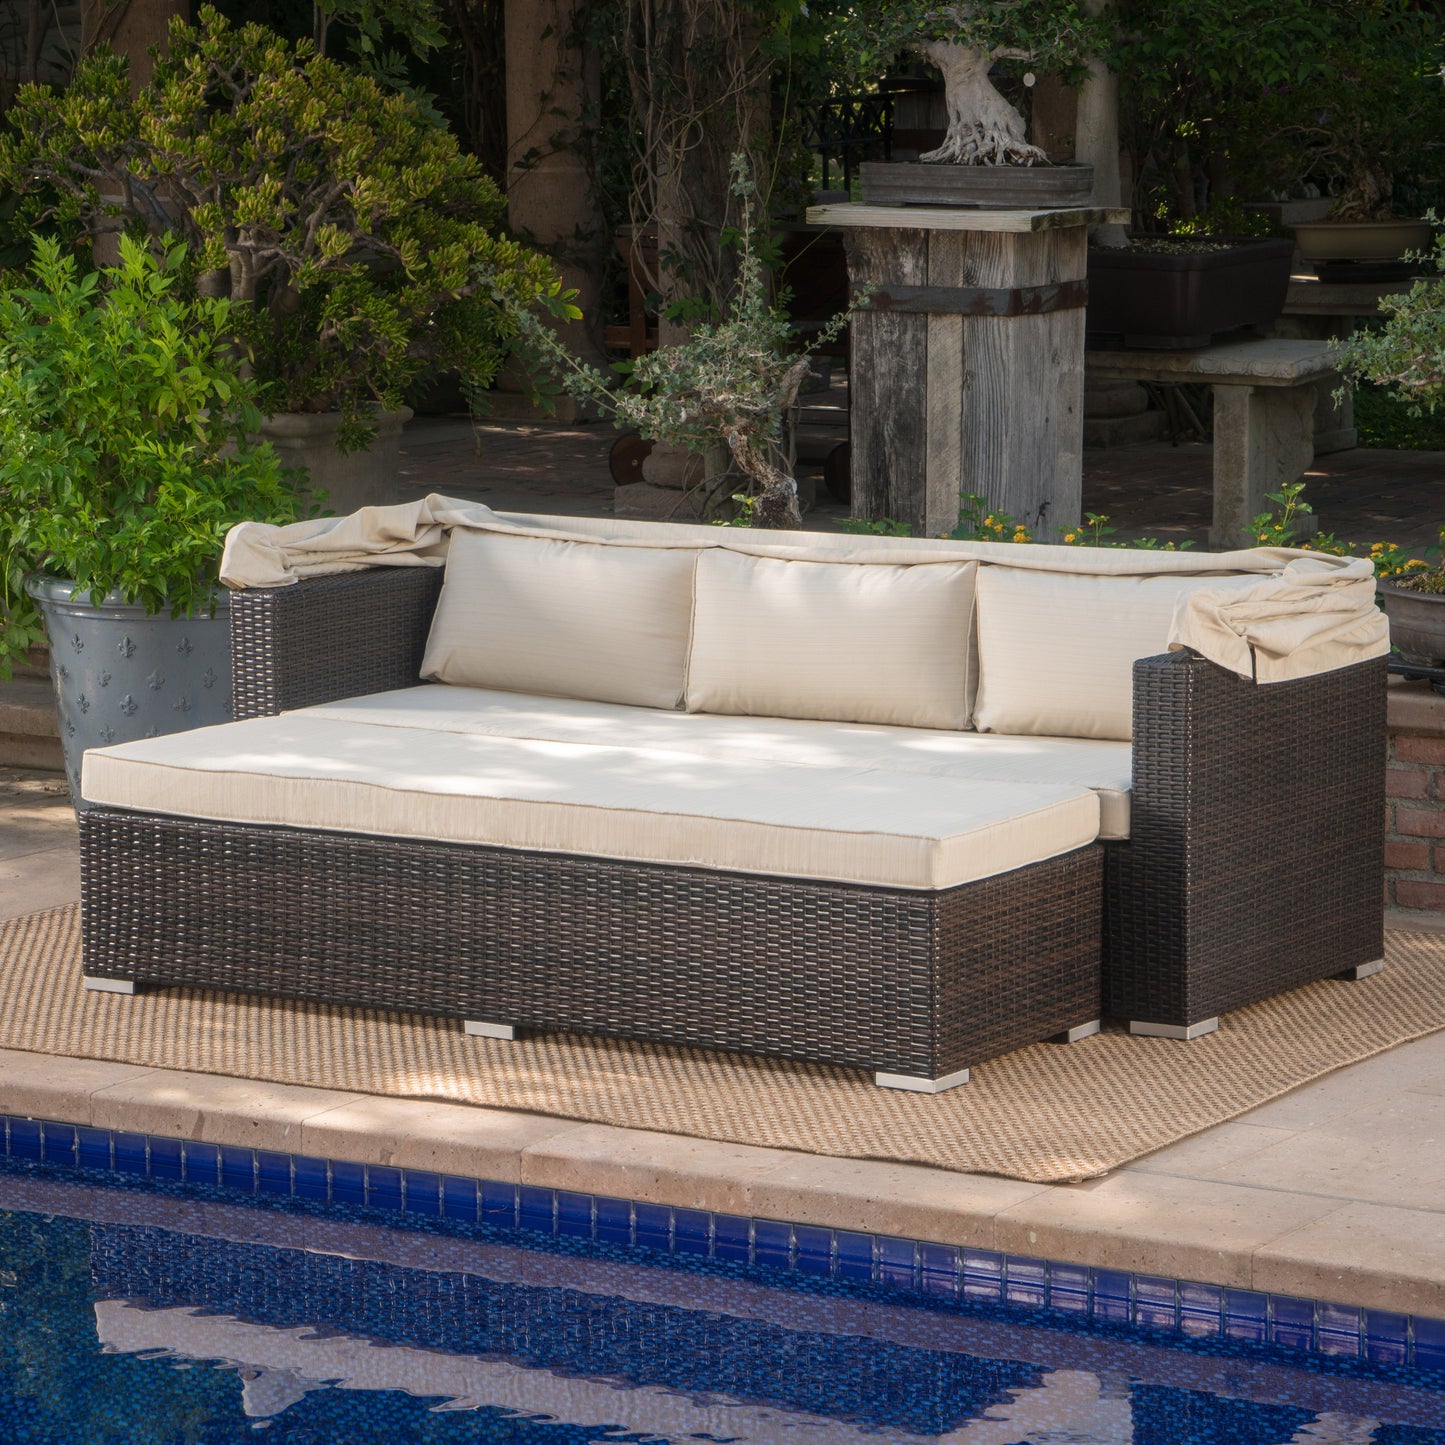 Grayson Outdoor Aluminum Framed Wicker Sofa with Water Resistant Canopy